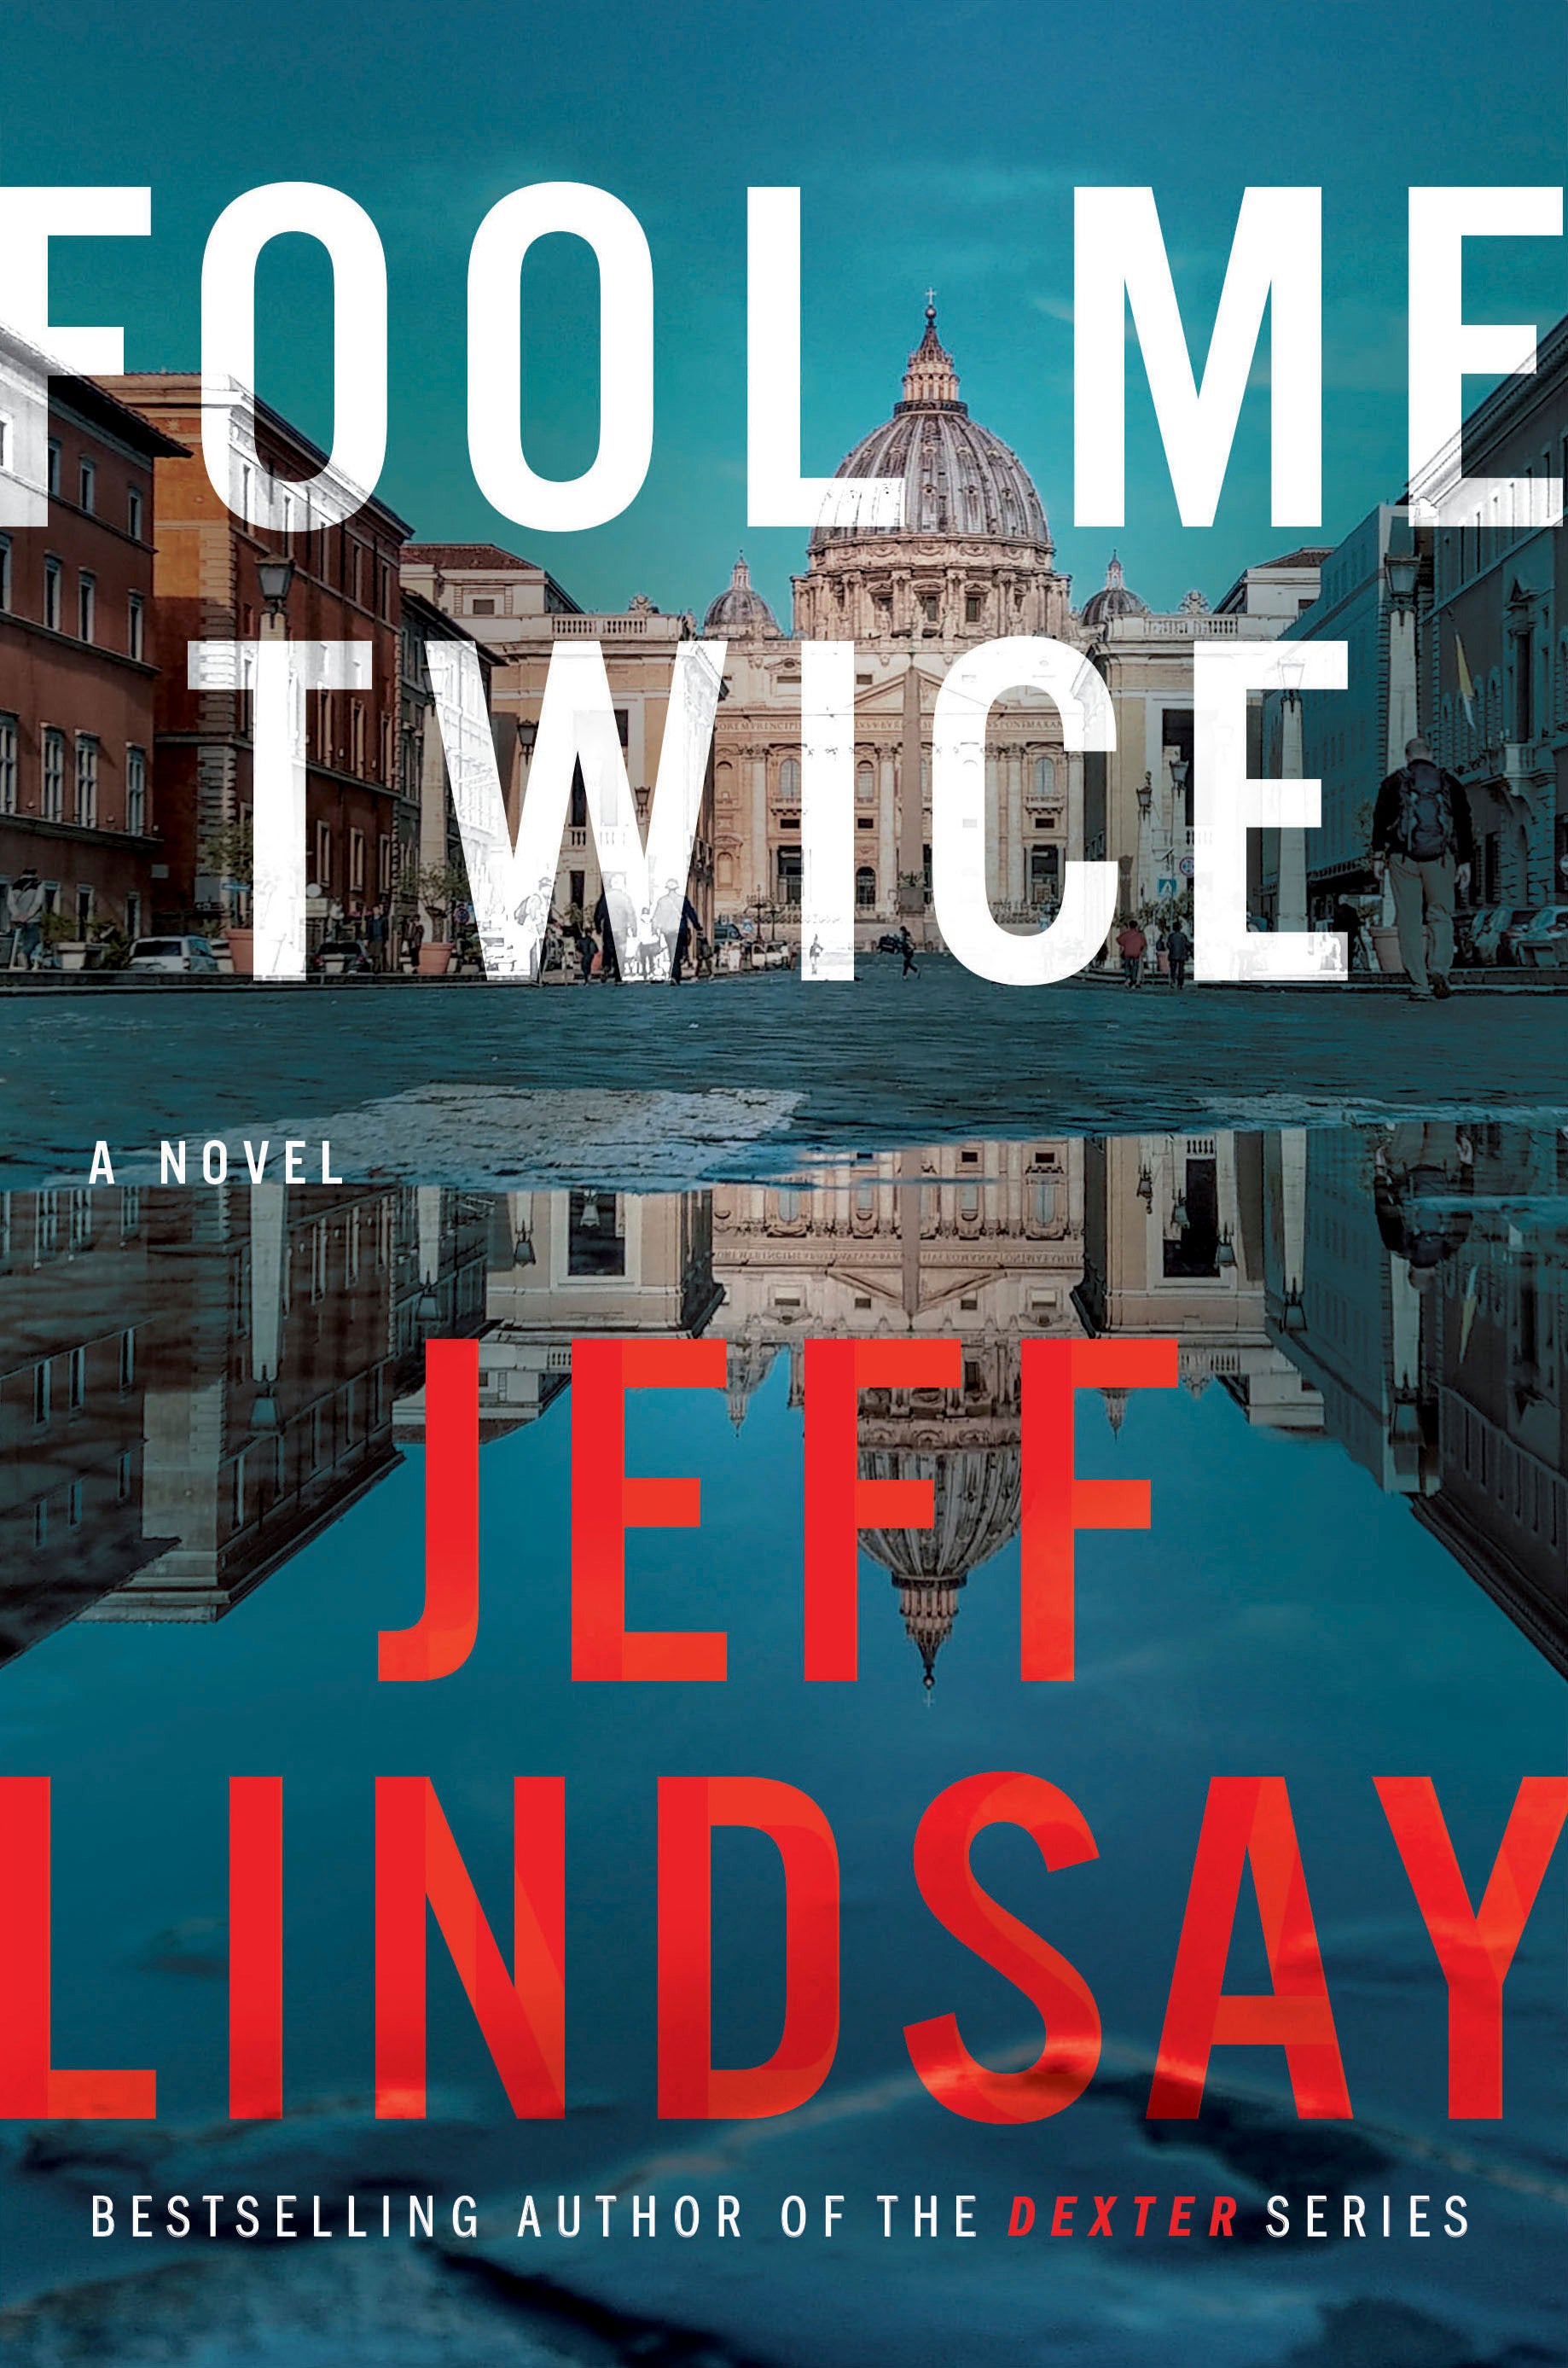 Book Review - Fool Me Twice